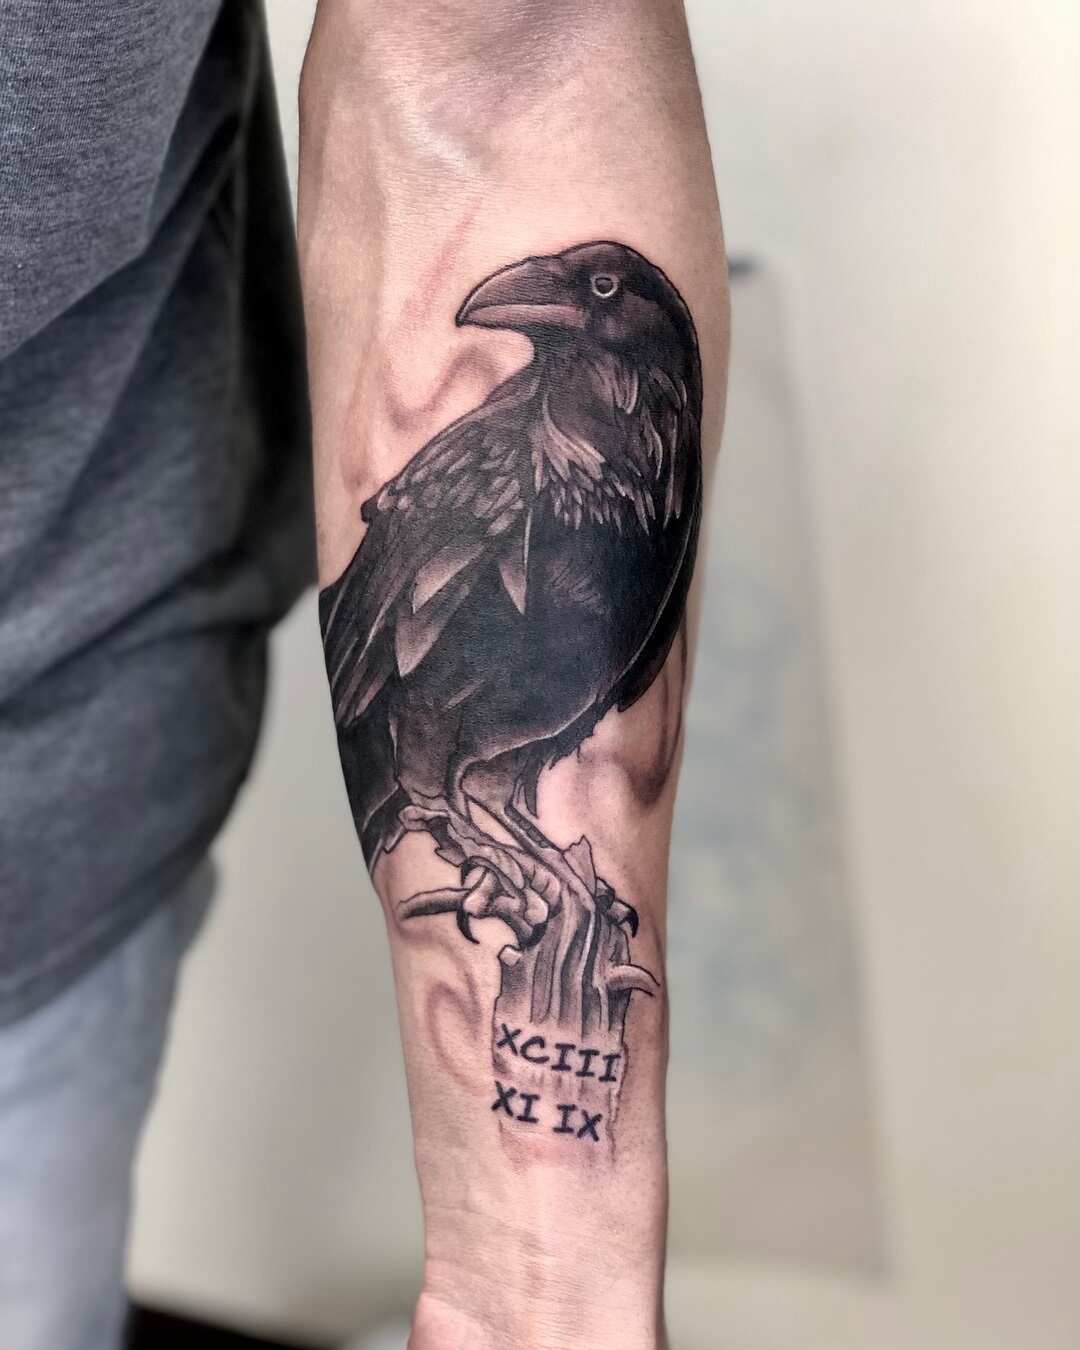 Megan Massacre - Chipping away! A little more progress on this giant raven  tattoo sleeve I've been working on! Part healed, part fresh. ✨@gritnglory  @missyou_music | Facebook